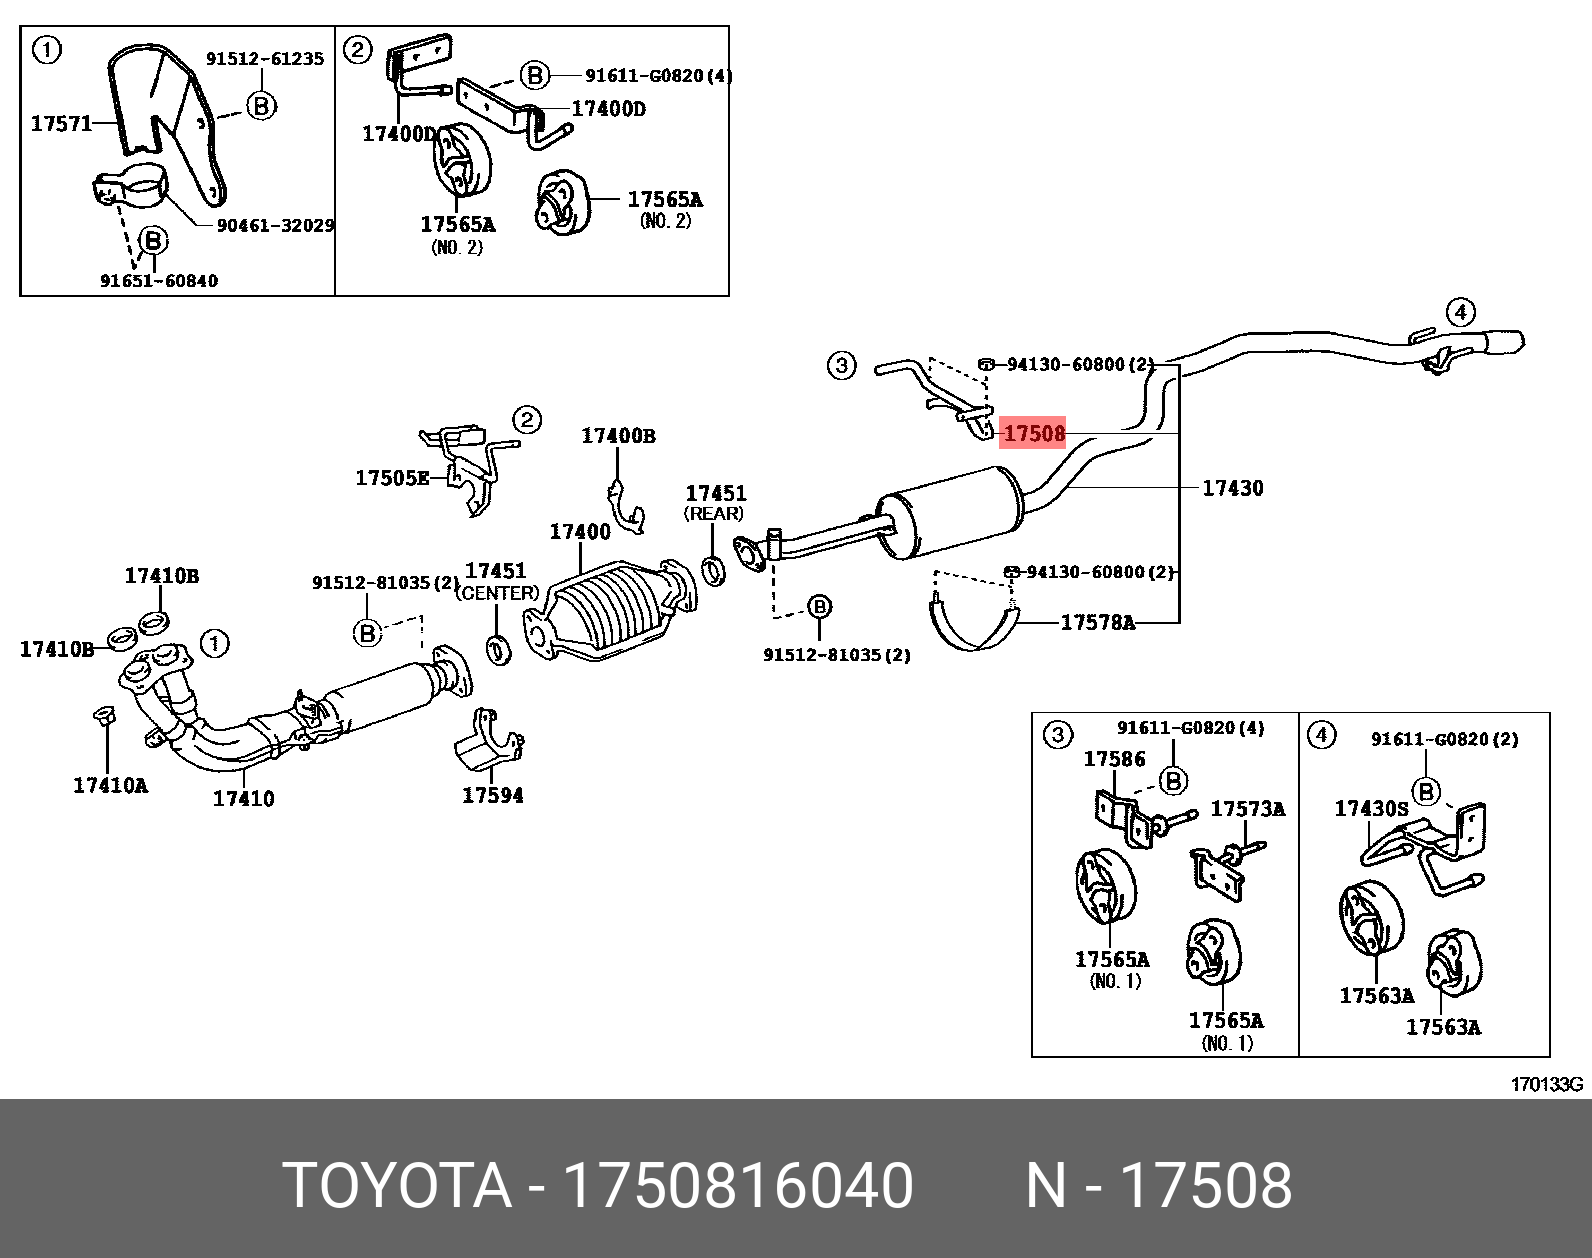 COROLLA 198705 - 199205, SUPPORT SUB-ASSY, EXHAUST PIPE, NO.3